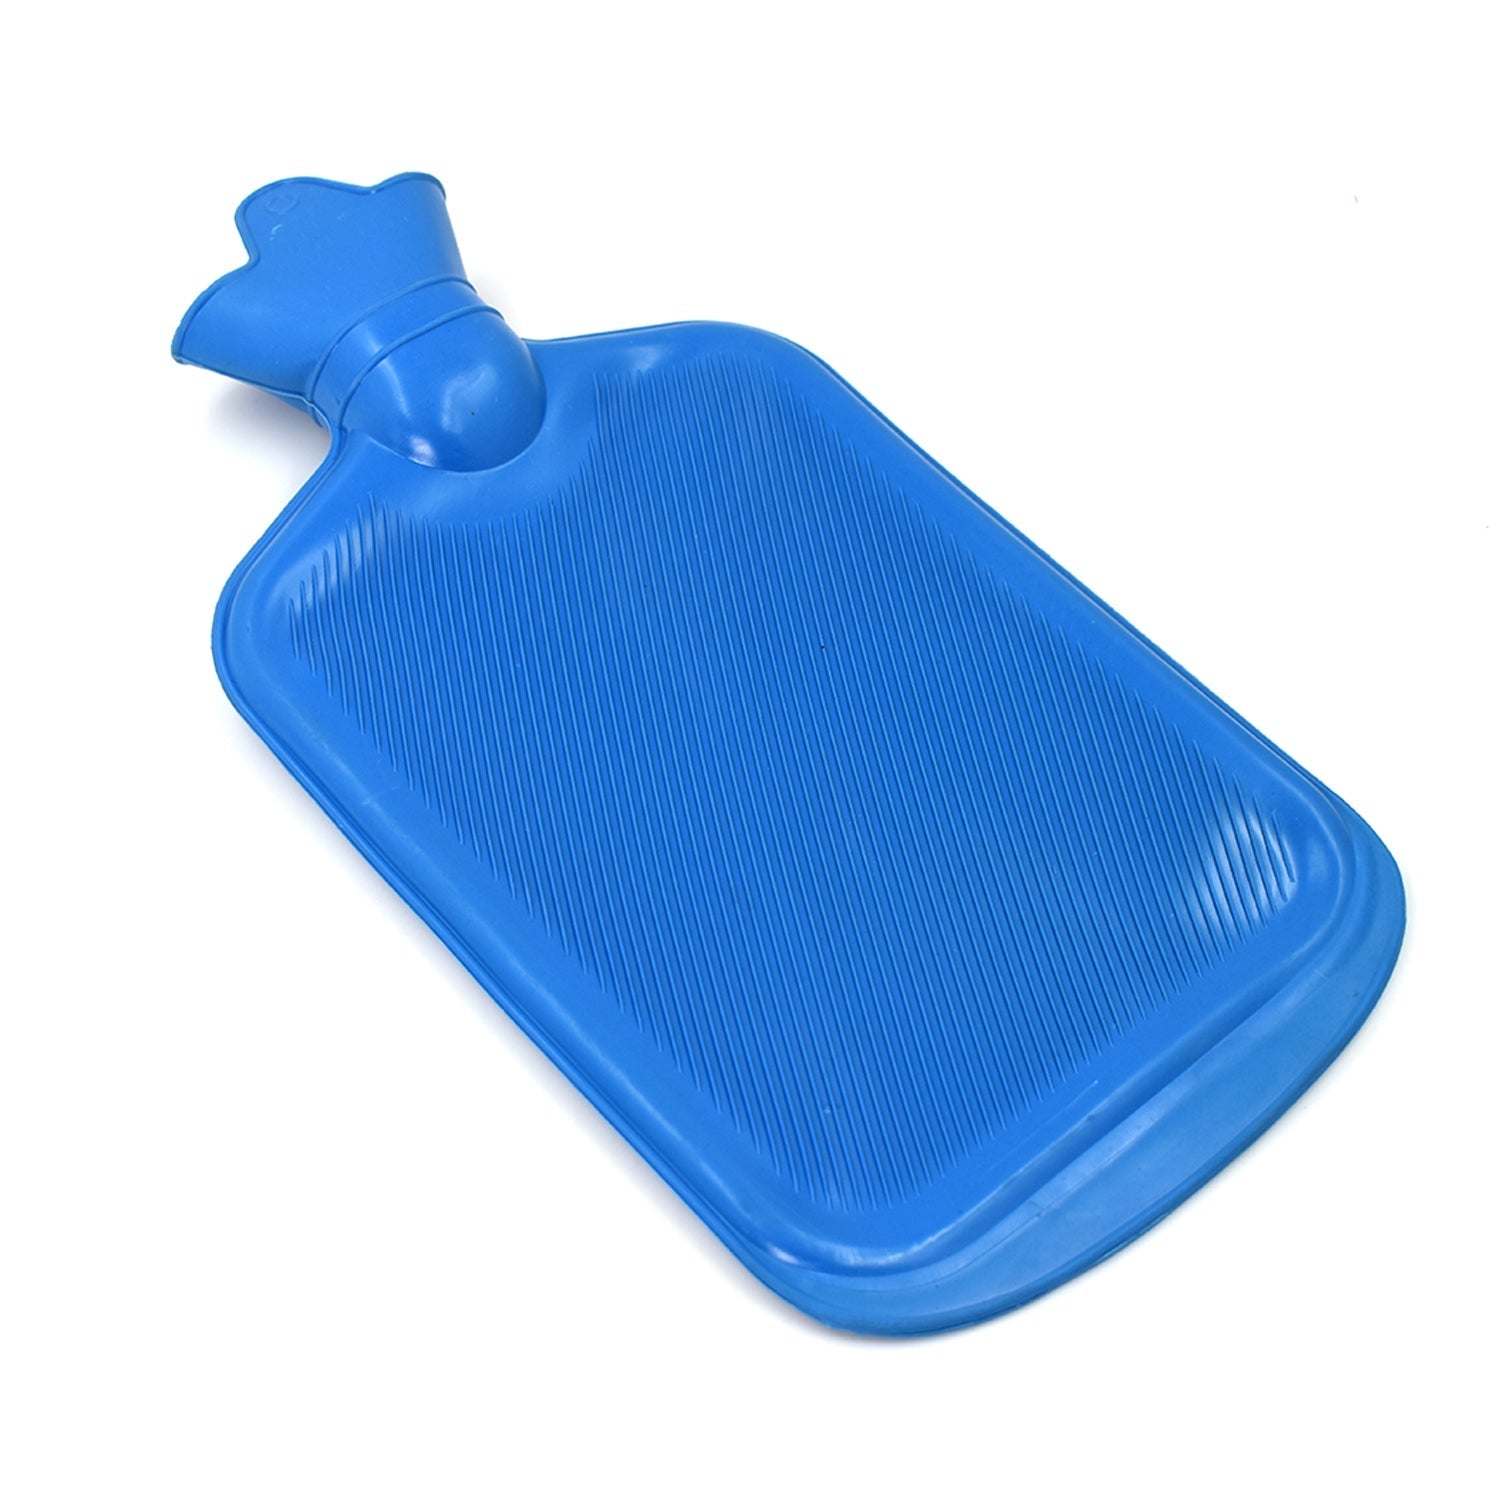 Hot water Bag 2000 ML used in all kinds of household and medical purposes as a pain relief from muscle and neural problems